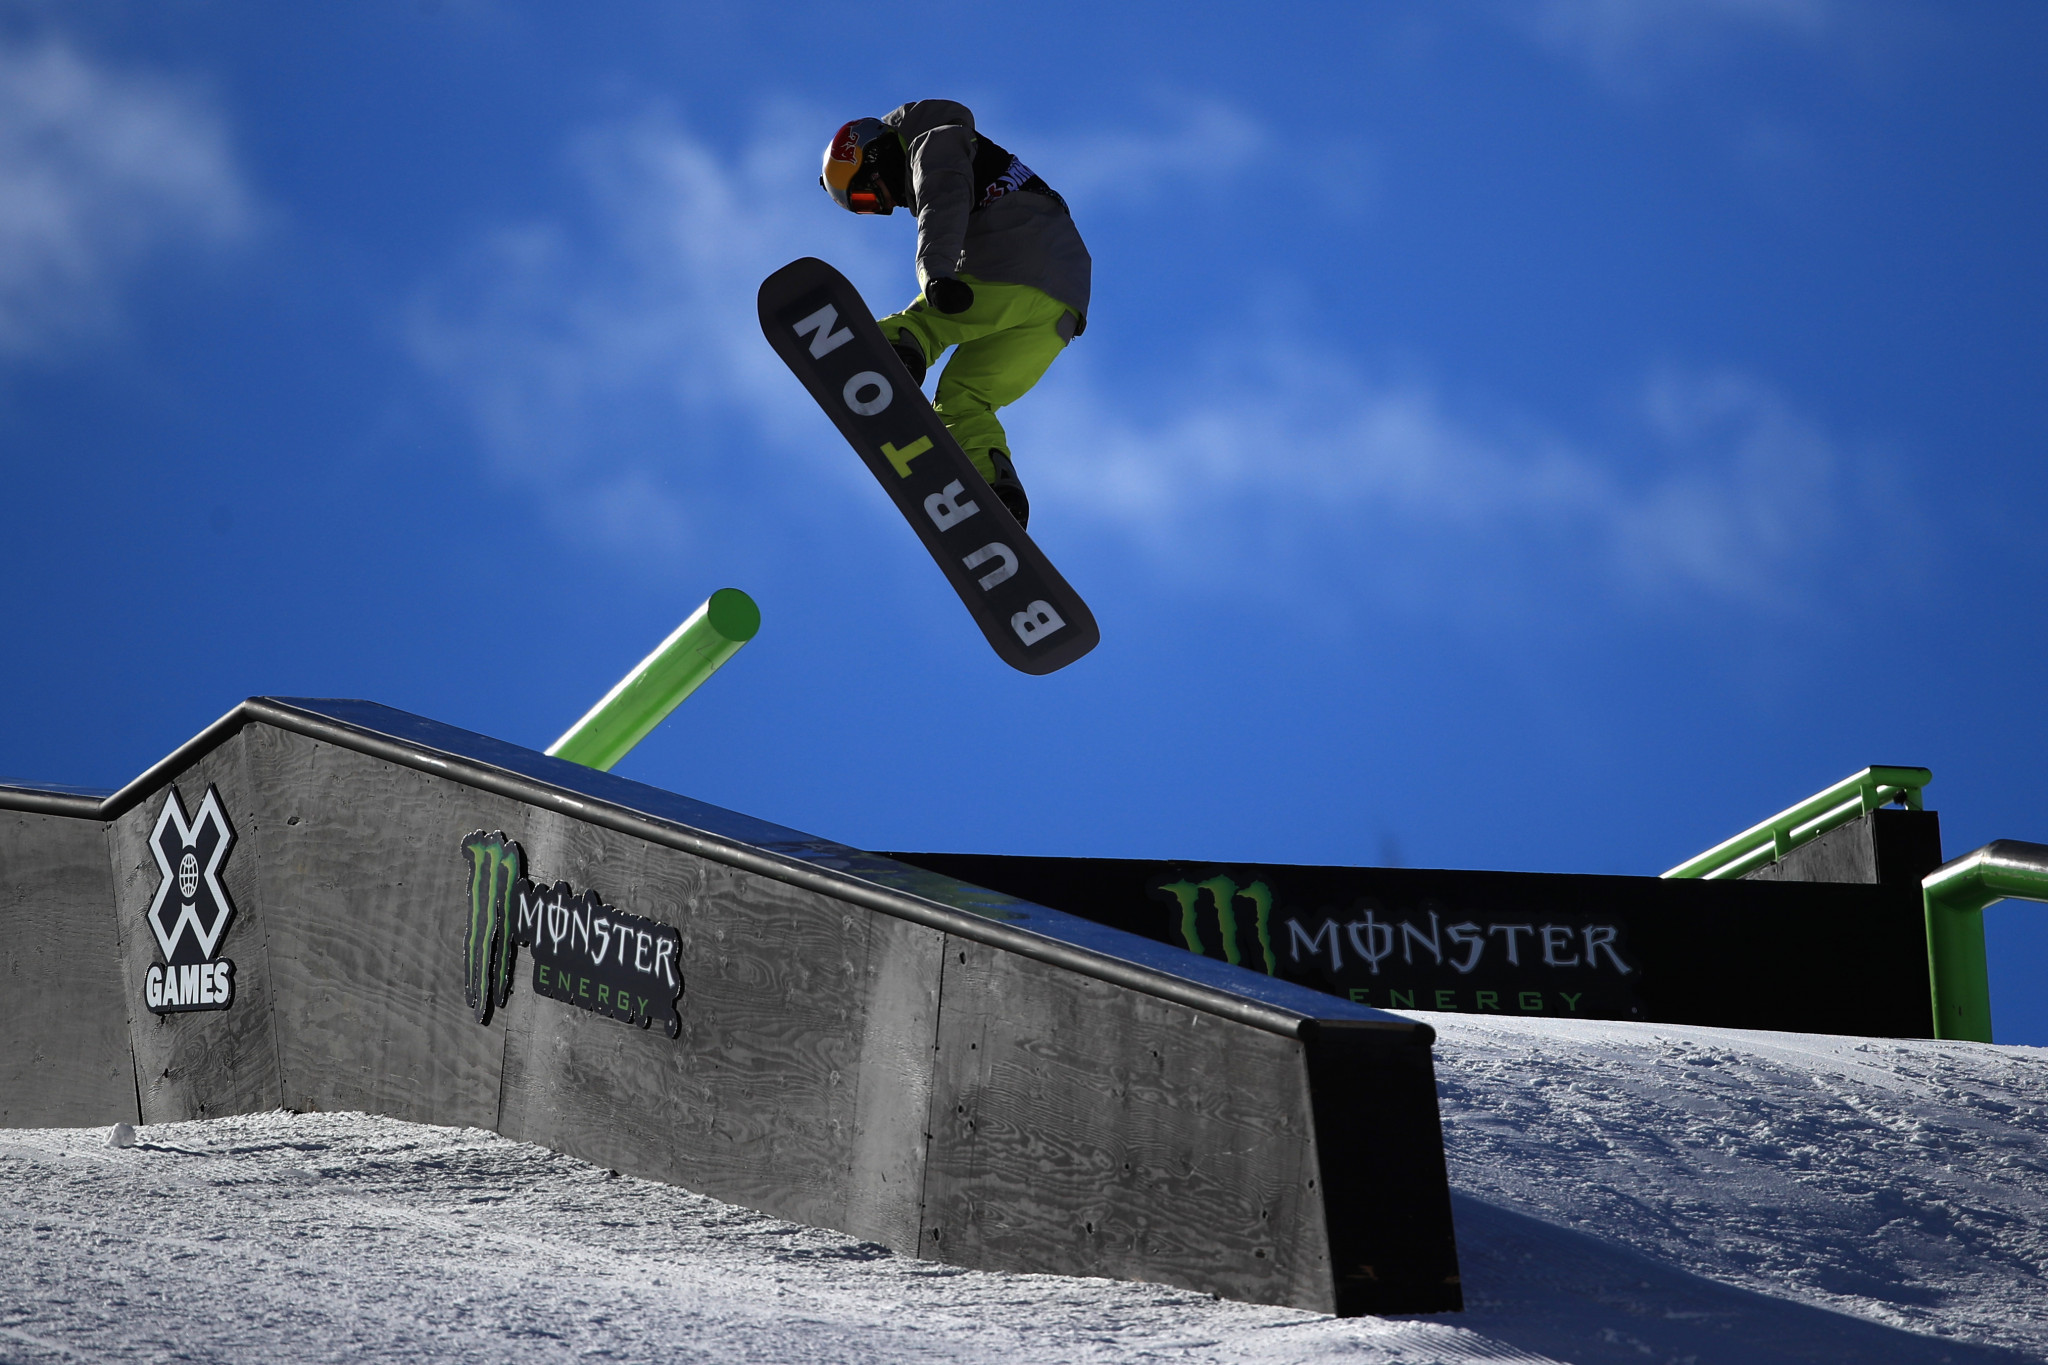 First Winter X Games event in China postponed due to coronavirus crisis